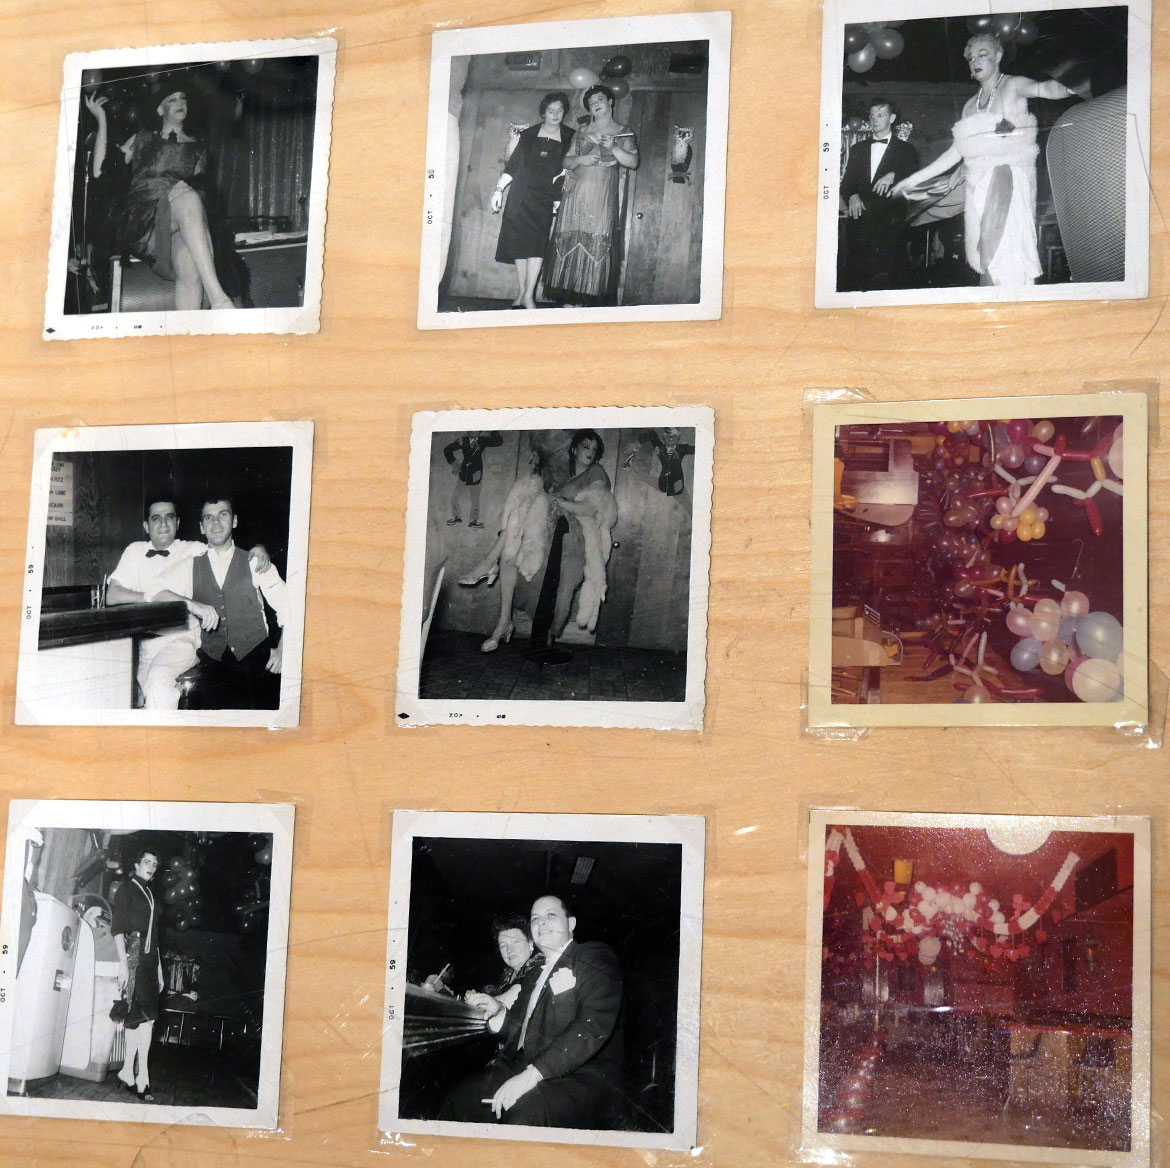 Jim McGrath and others, "Untitled [Playland]," 1950s to 1980s, photographs. (Collection of The History Project)